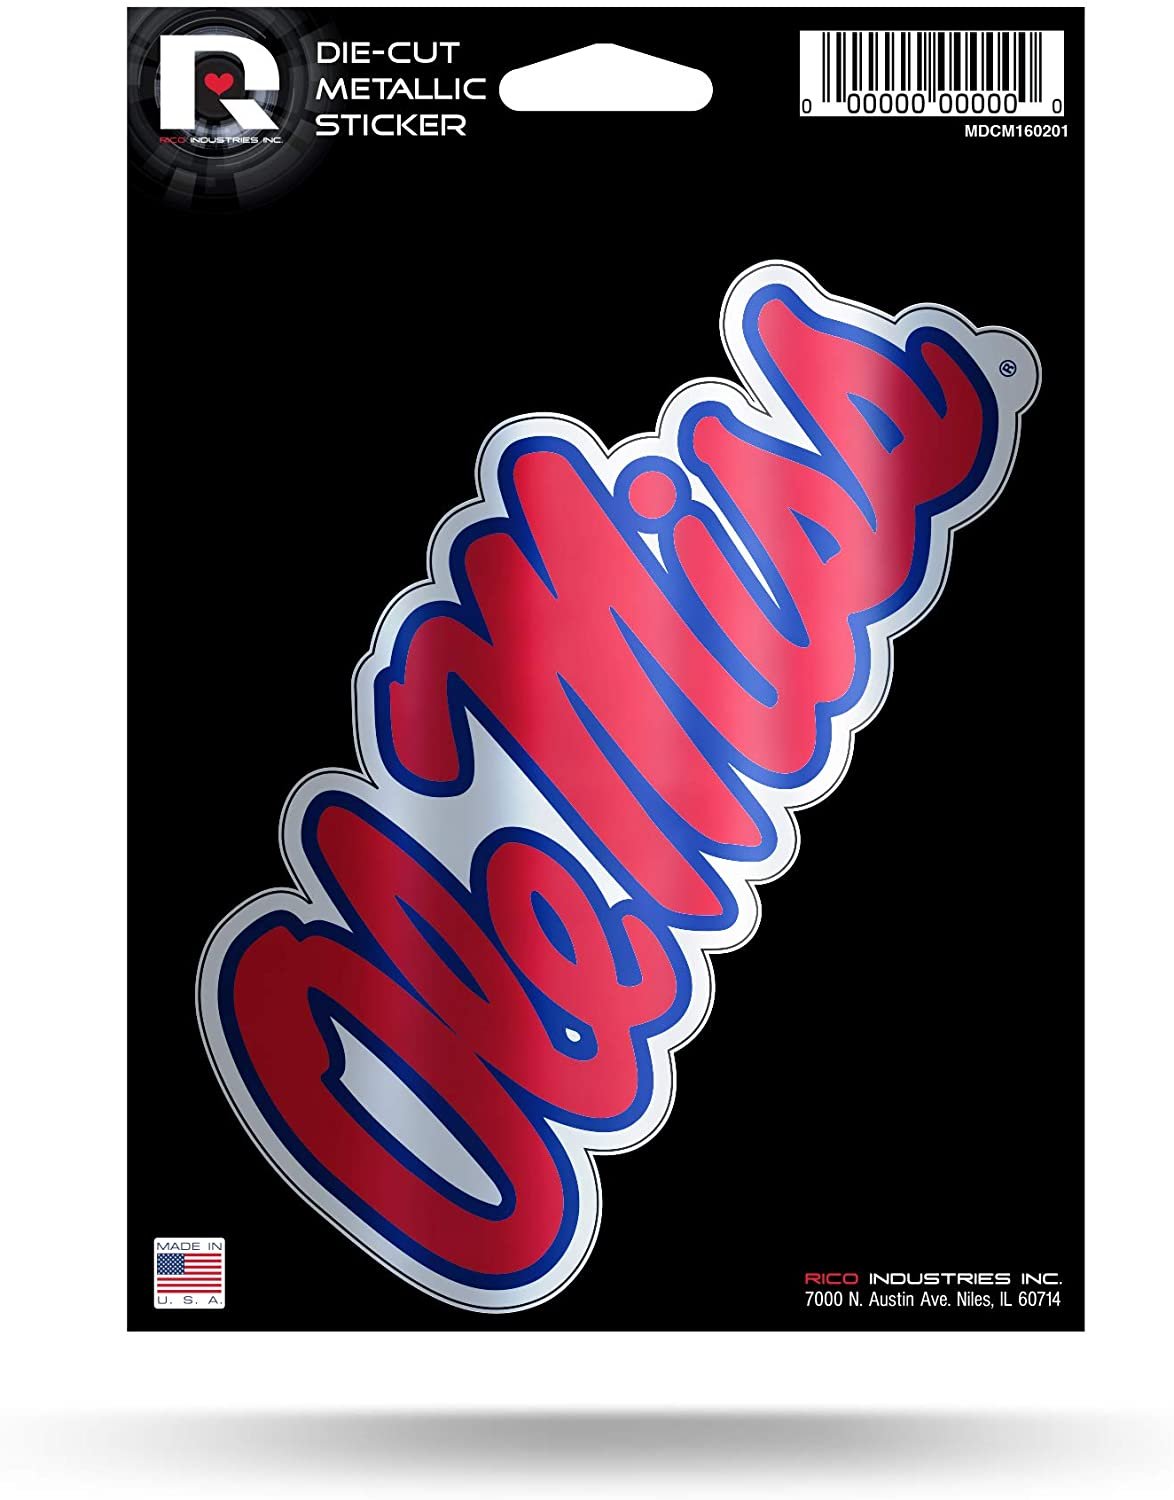 University of Mississippi Rebels Ole Miss 5 Inch Die Cut Decal Sticker, Metallic Shimmer Design, Full Adhesive Backing